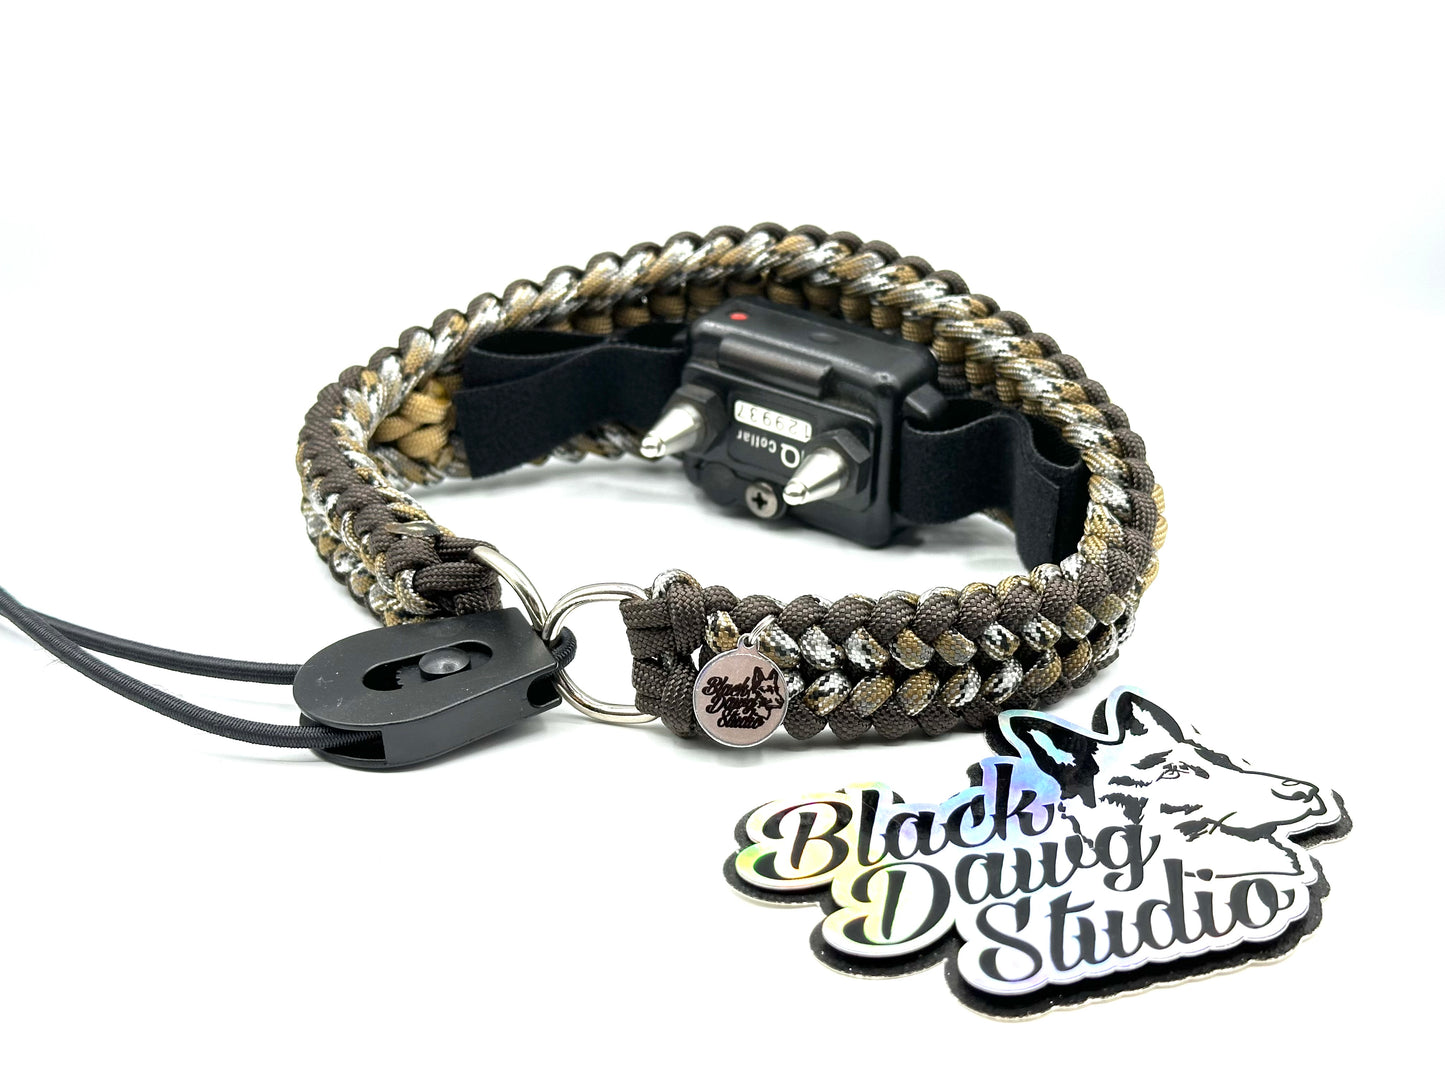 e-Secret Keeper Paracord Collar - Electric/Remote Training Collar Cover - Walnut, Scorpion, Tan, Scorpion, and Charcoal